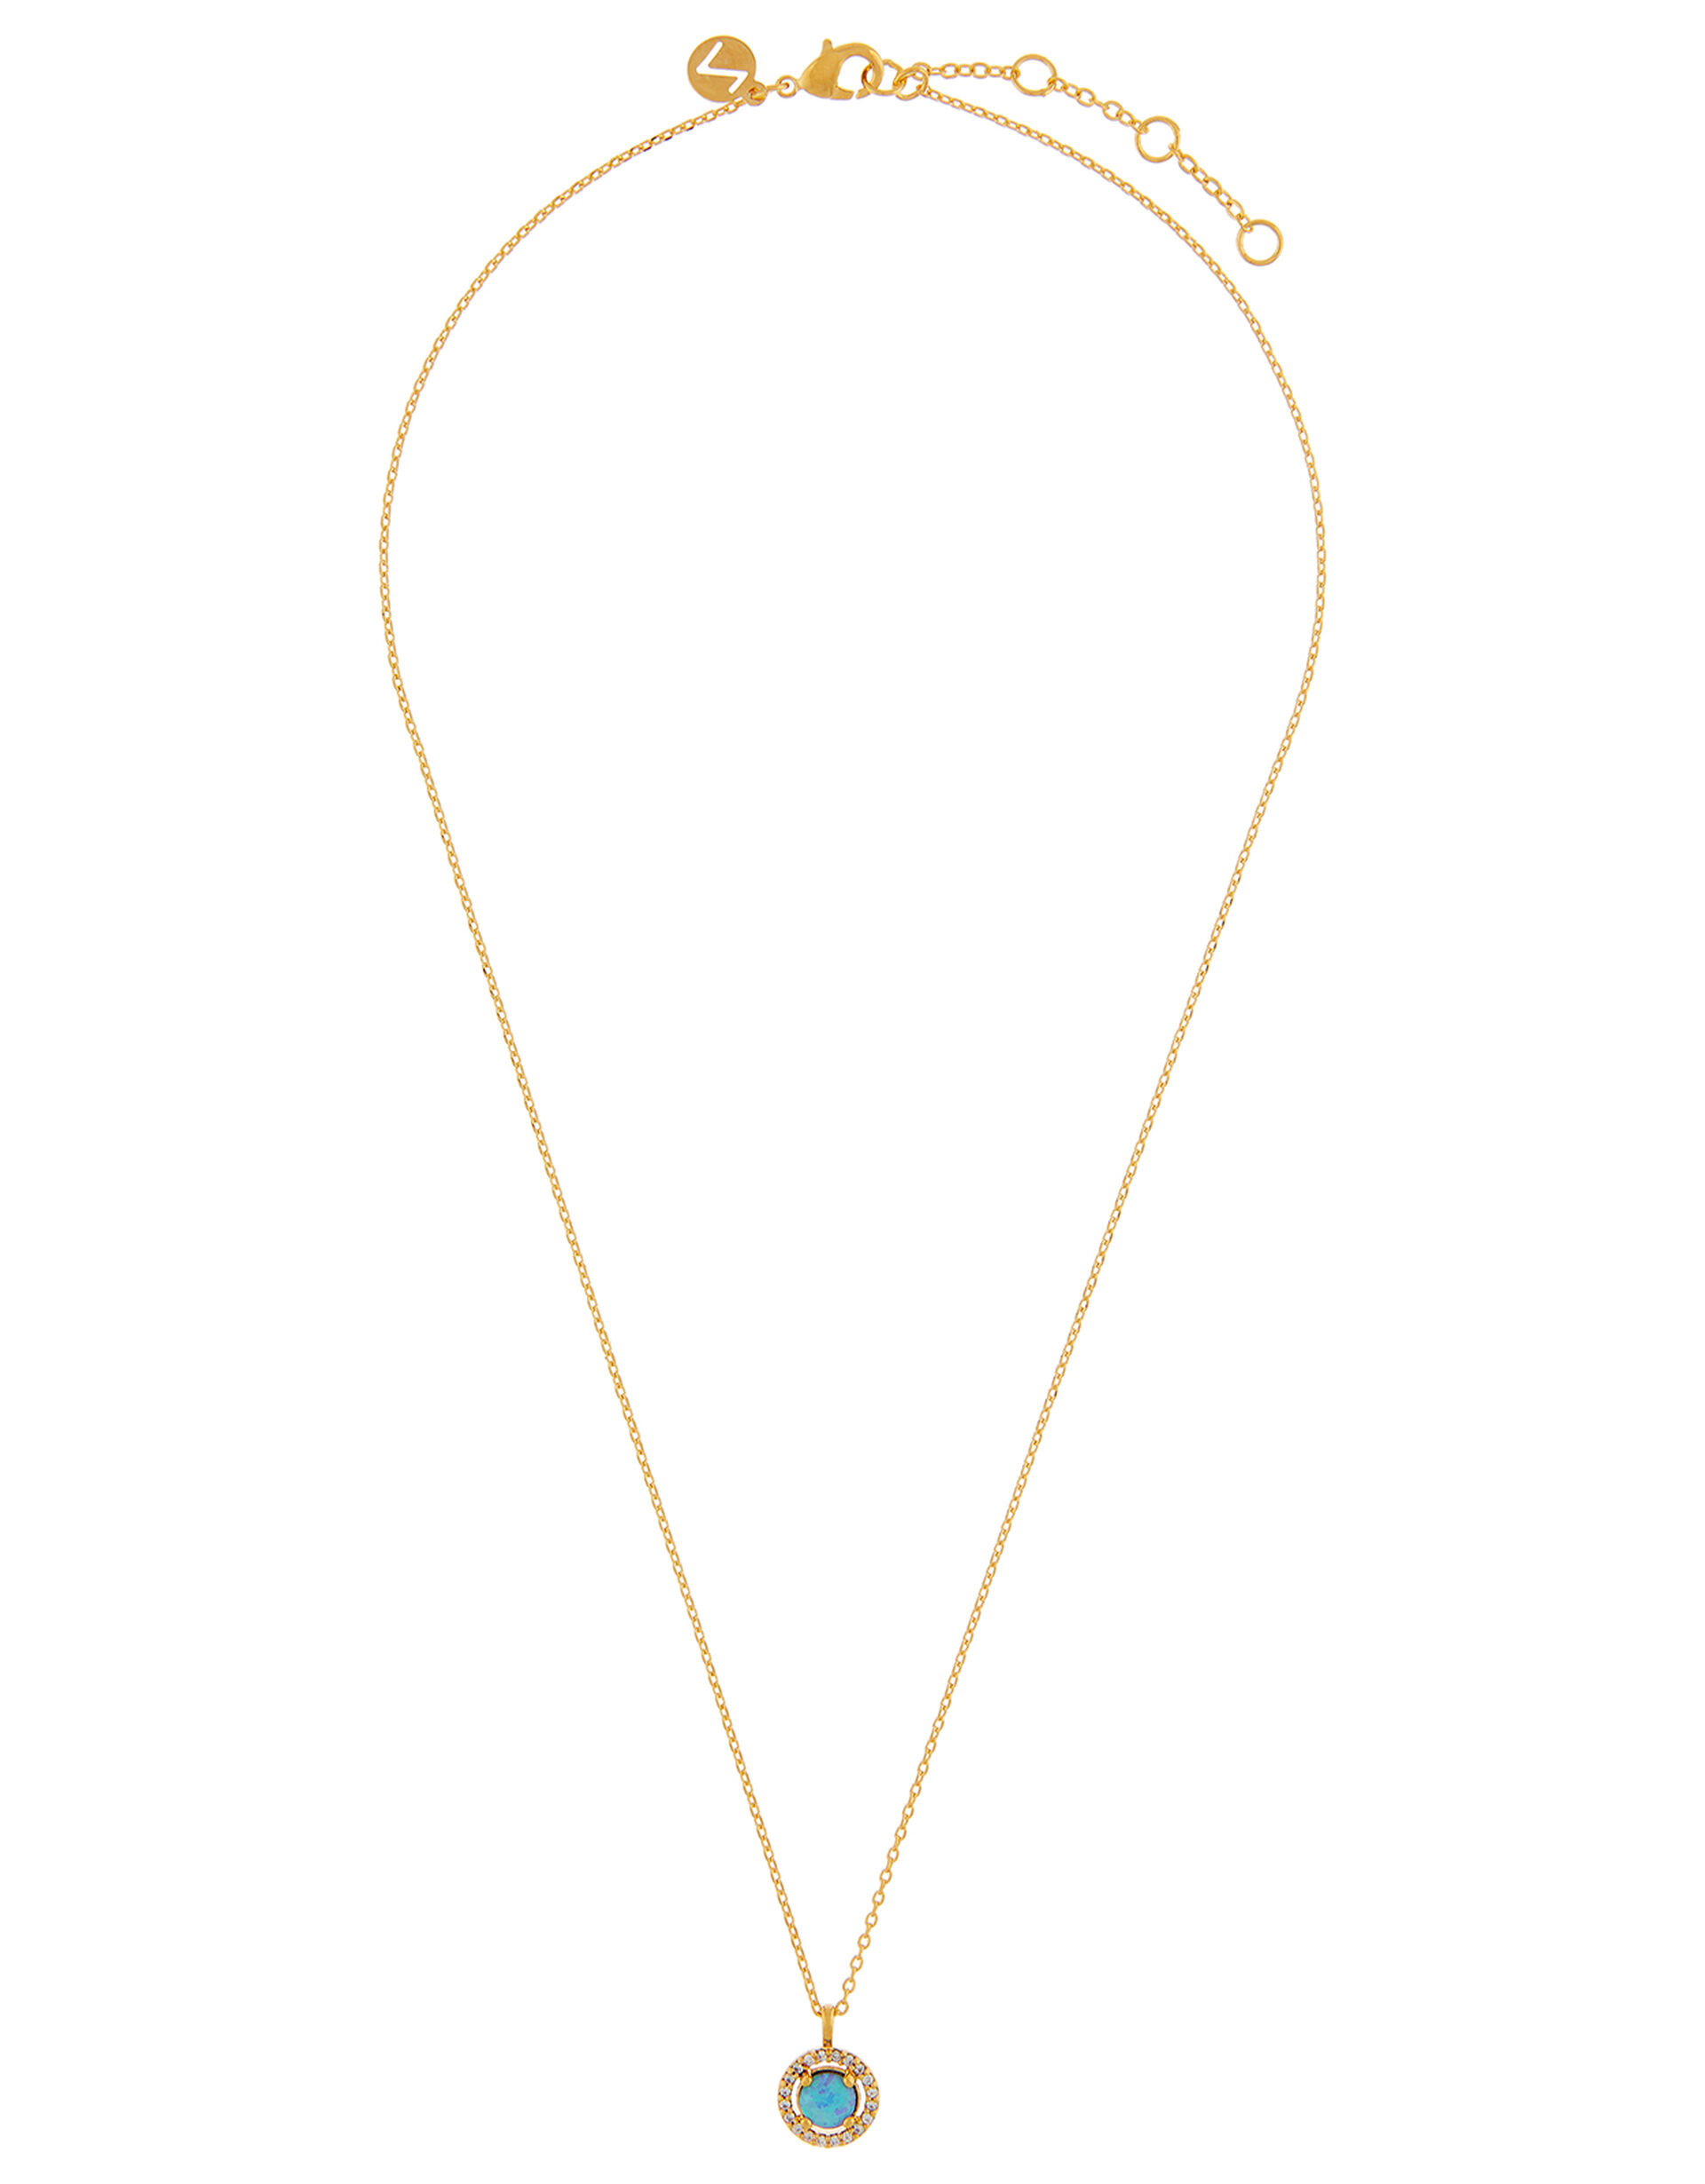 Gold-Plated Stone Pendant Necklace, , large